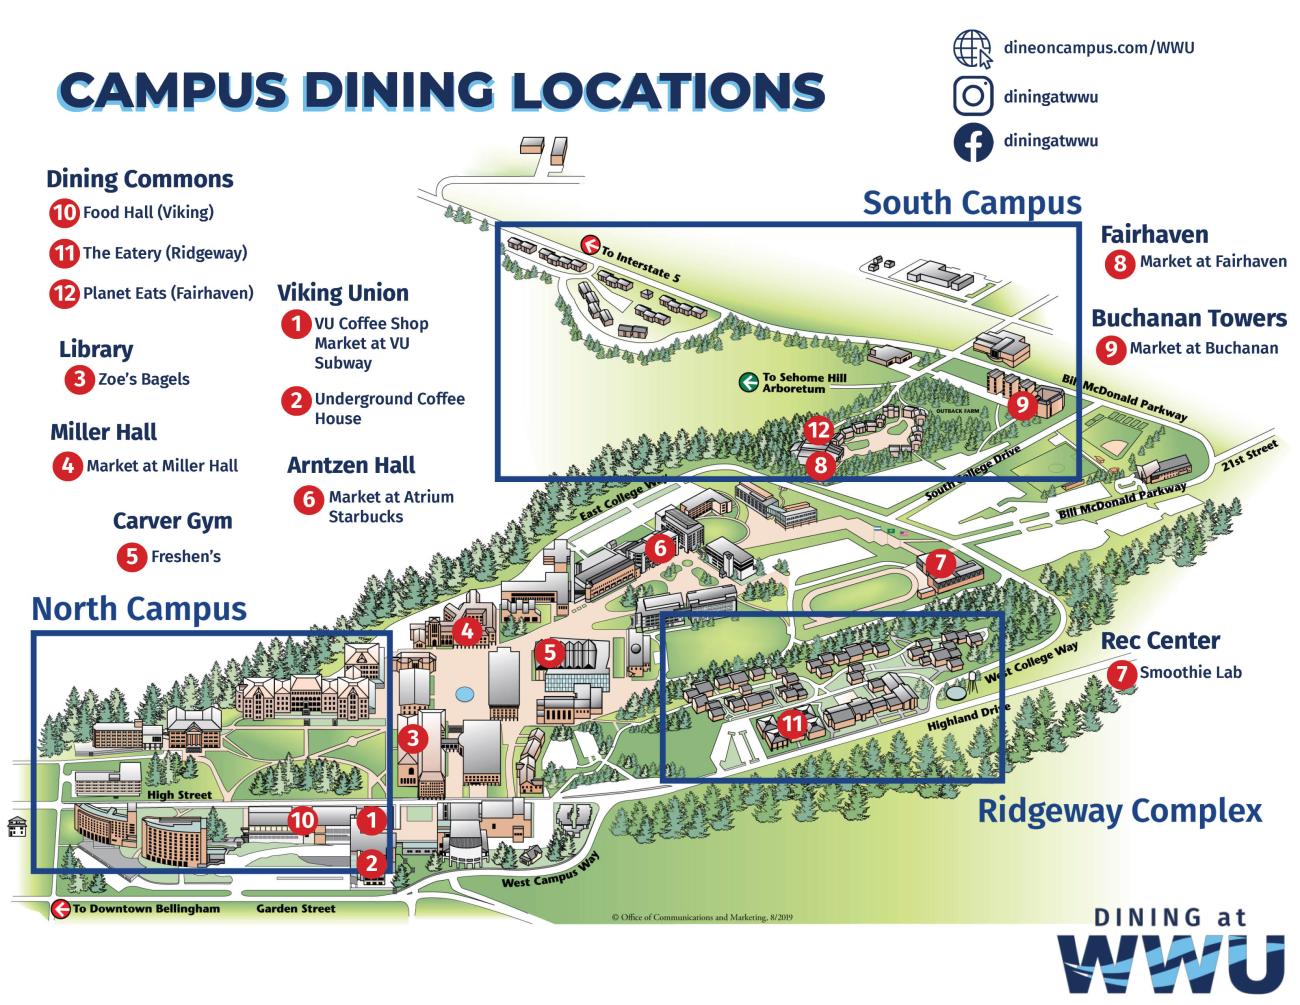 Map of campus dining locations